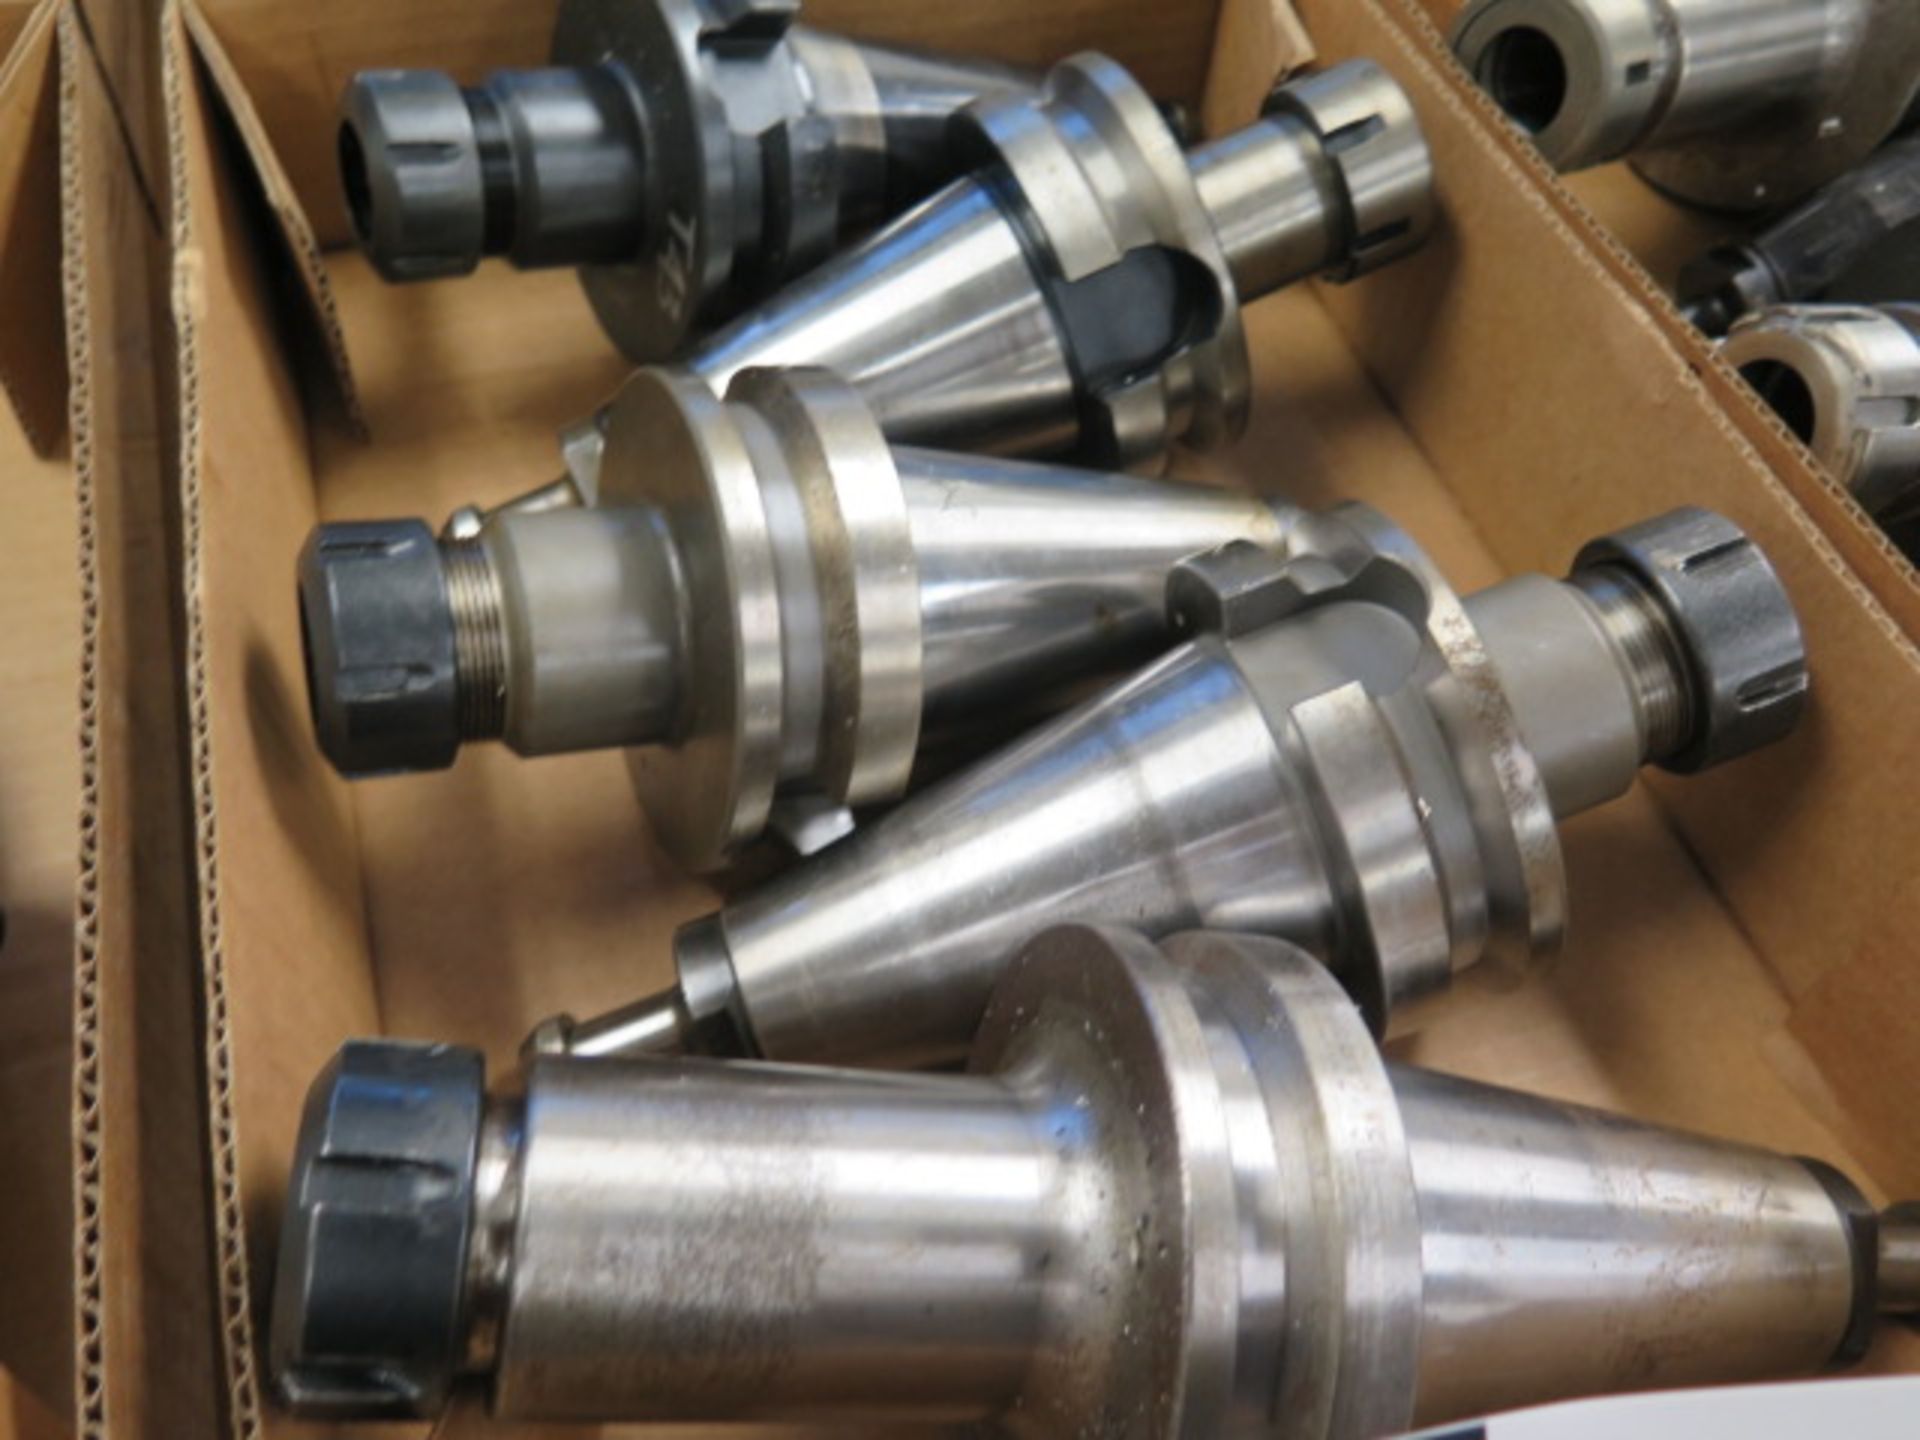 BT-50 Taper ER32 Collet Chucks (5) (SOLD AS-IS - NO WARRANTY) (Located @ 2229 Ringwood Ave. San Jose - Image 3 of 4